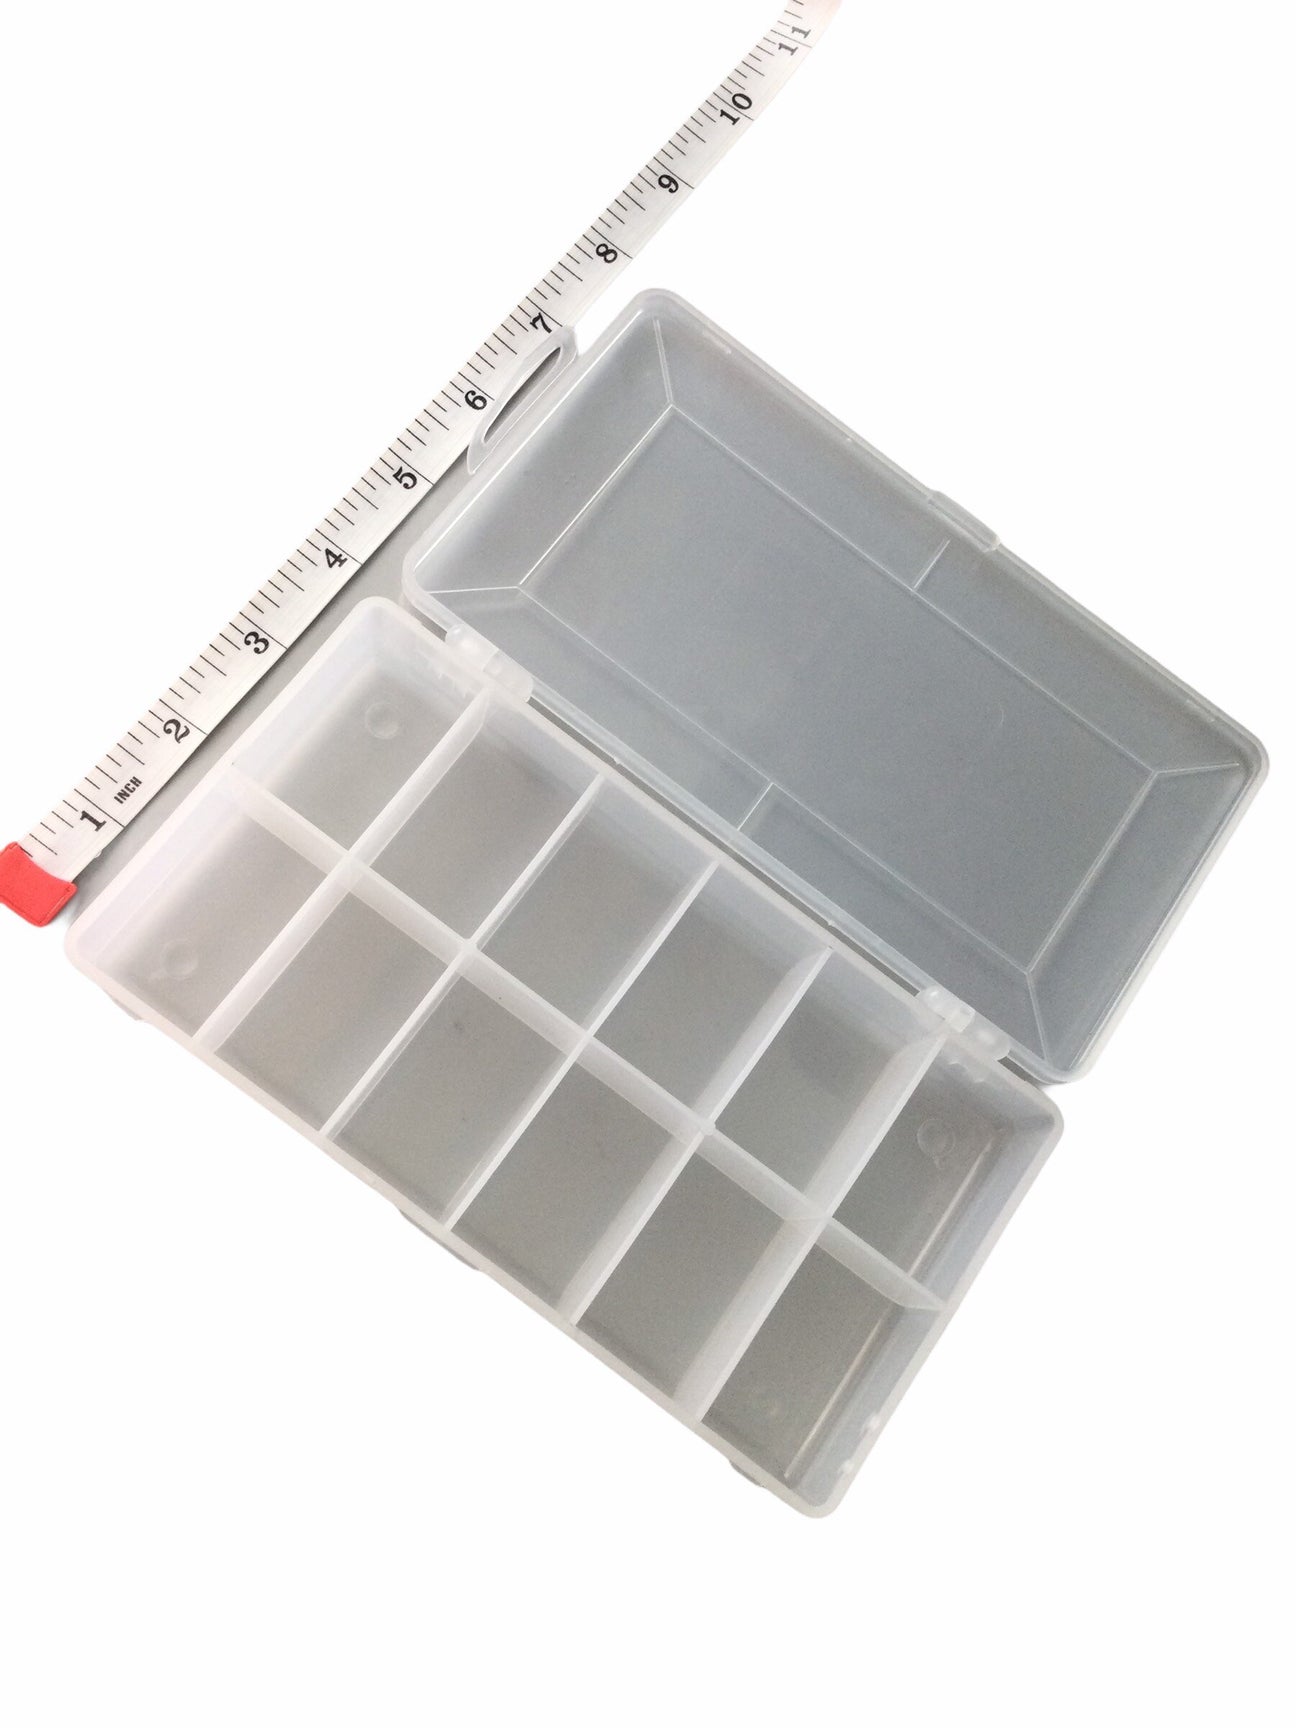 Clear Small Jewelry Box Plastic Organizer Box with Fixed Dividers for  Crafts Bead Fishing Tackle Storage 6 Compartment Q84D